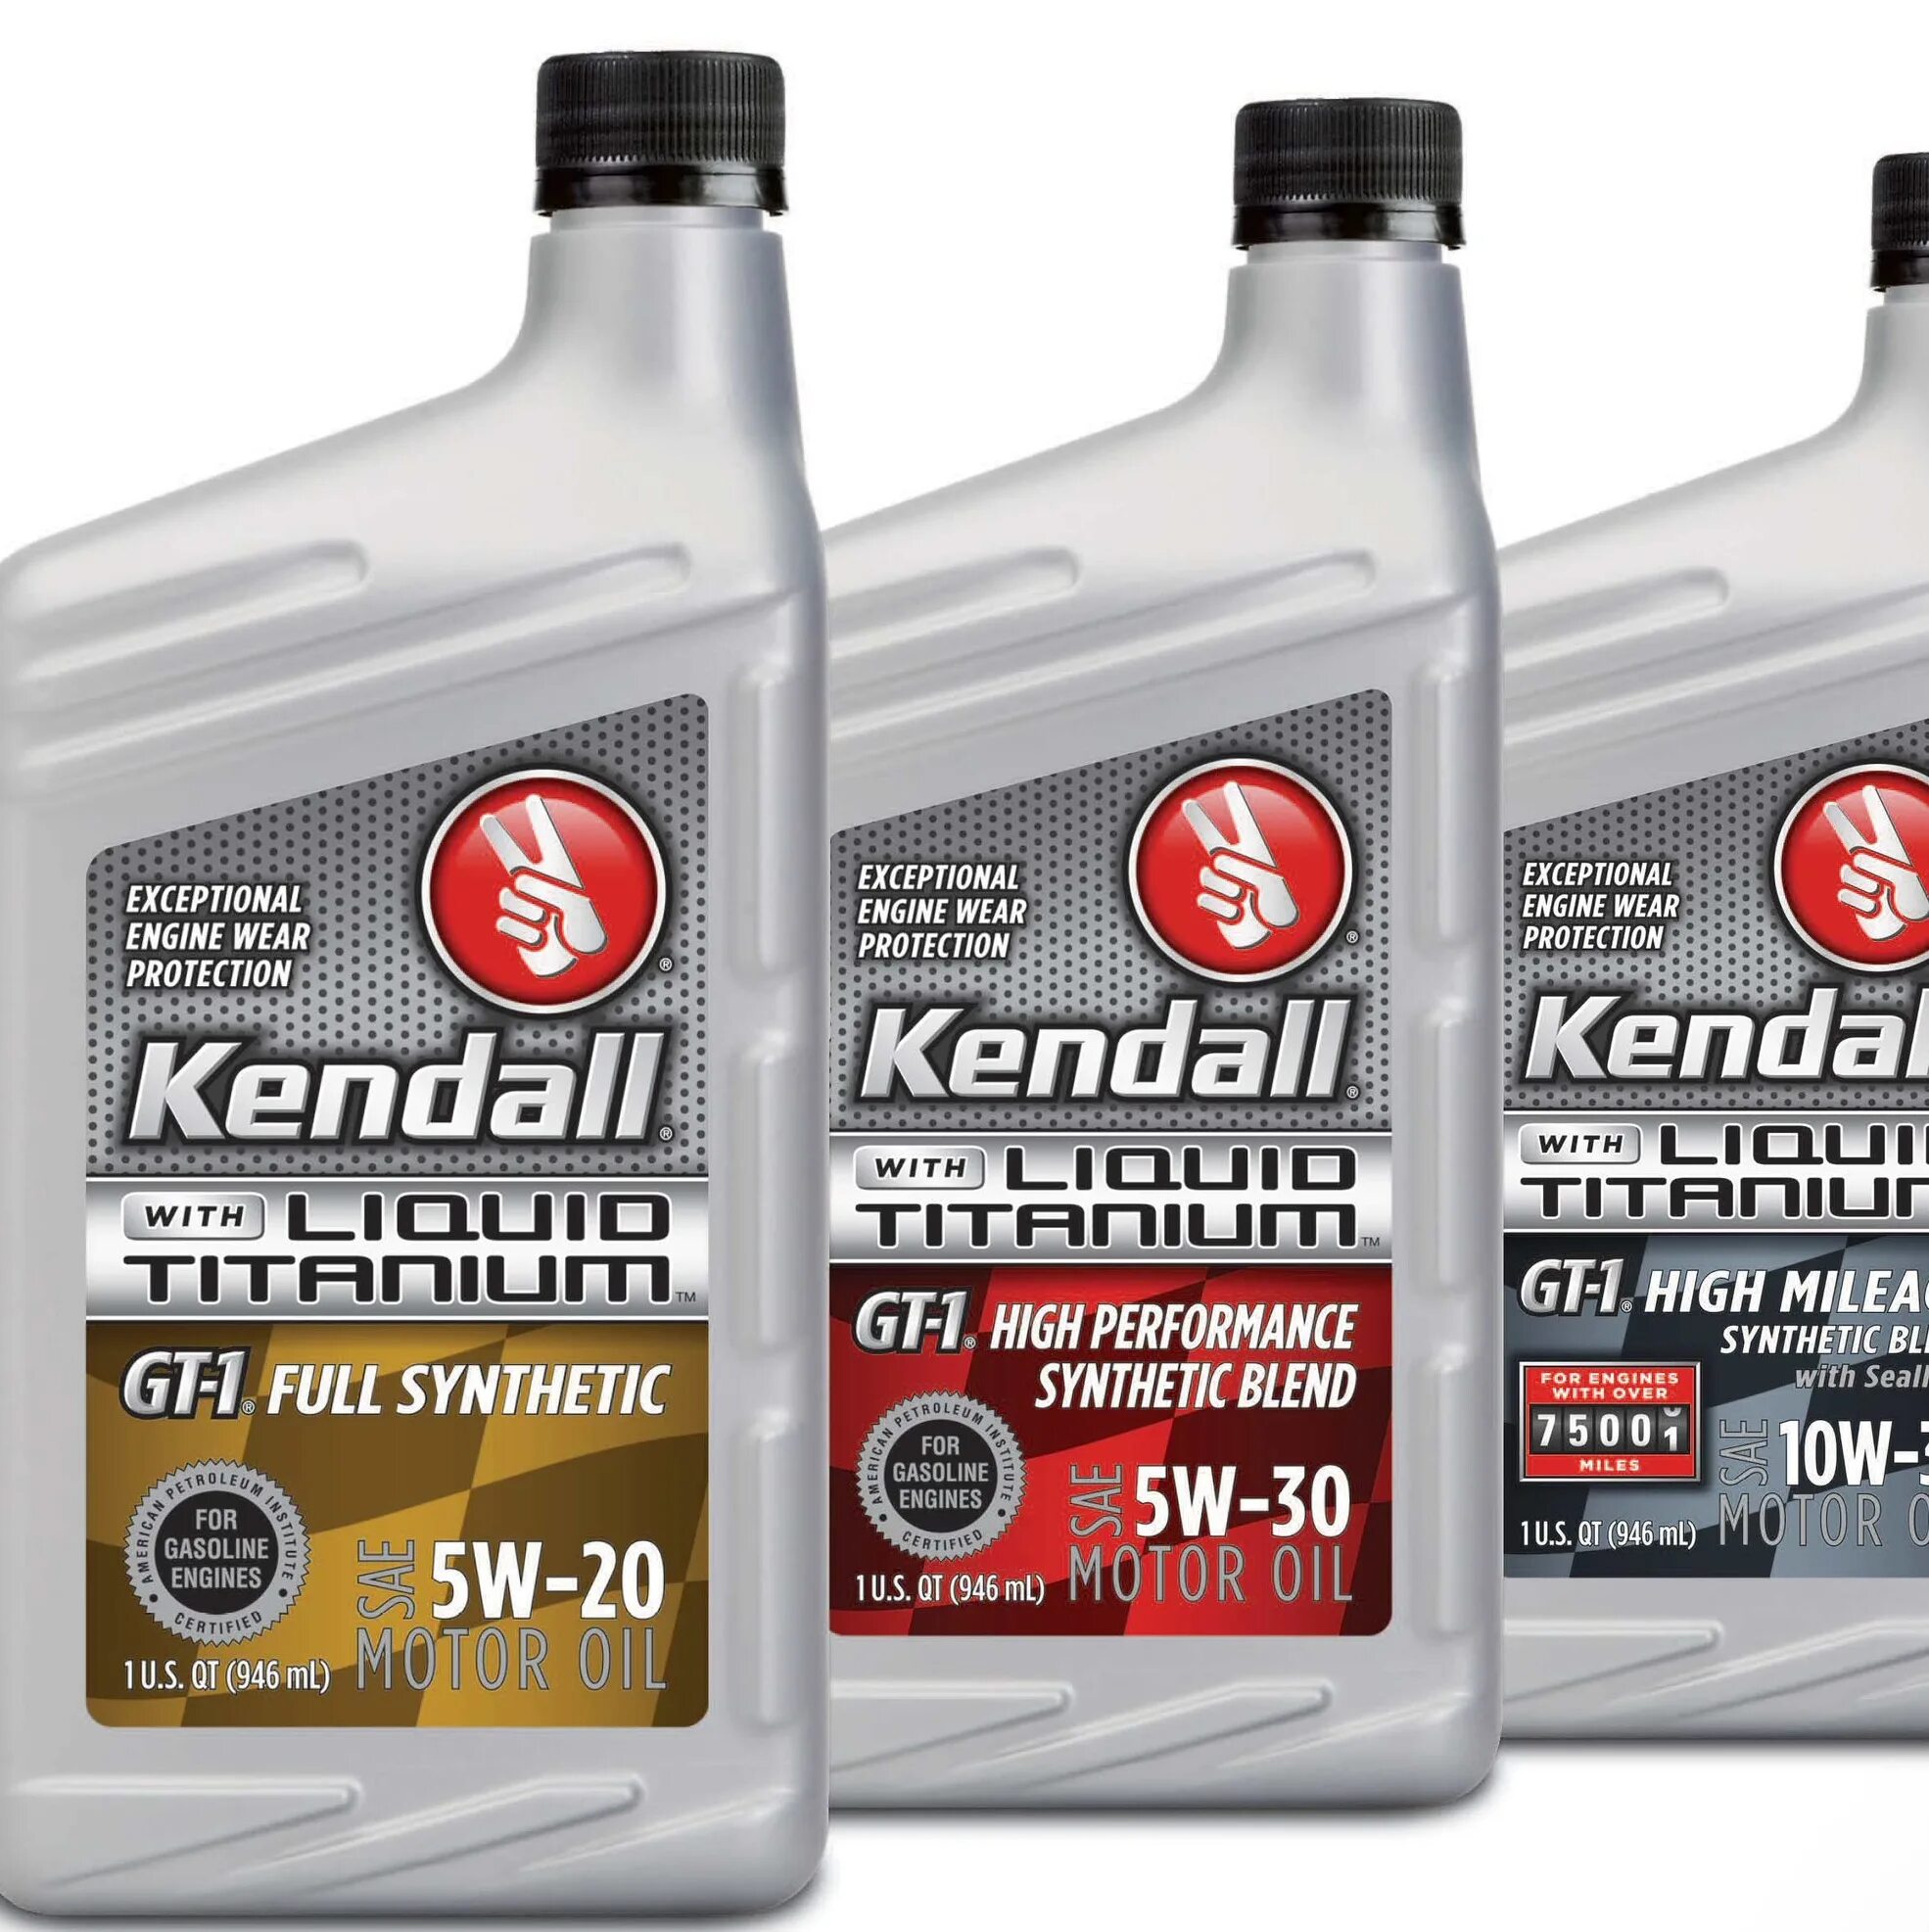 Масло performance. Моторное масло Kendall gt-1 5w30. Kendall gt-1 5w-20 High Performance Synthetic Blend Motor Oil with Liquid Titanium. Kendall gt-1 High Performance Synthetic Blend Liquid Titanium 5w-30. Масло Kendall 0w20 gt1.